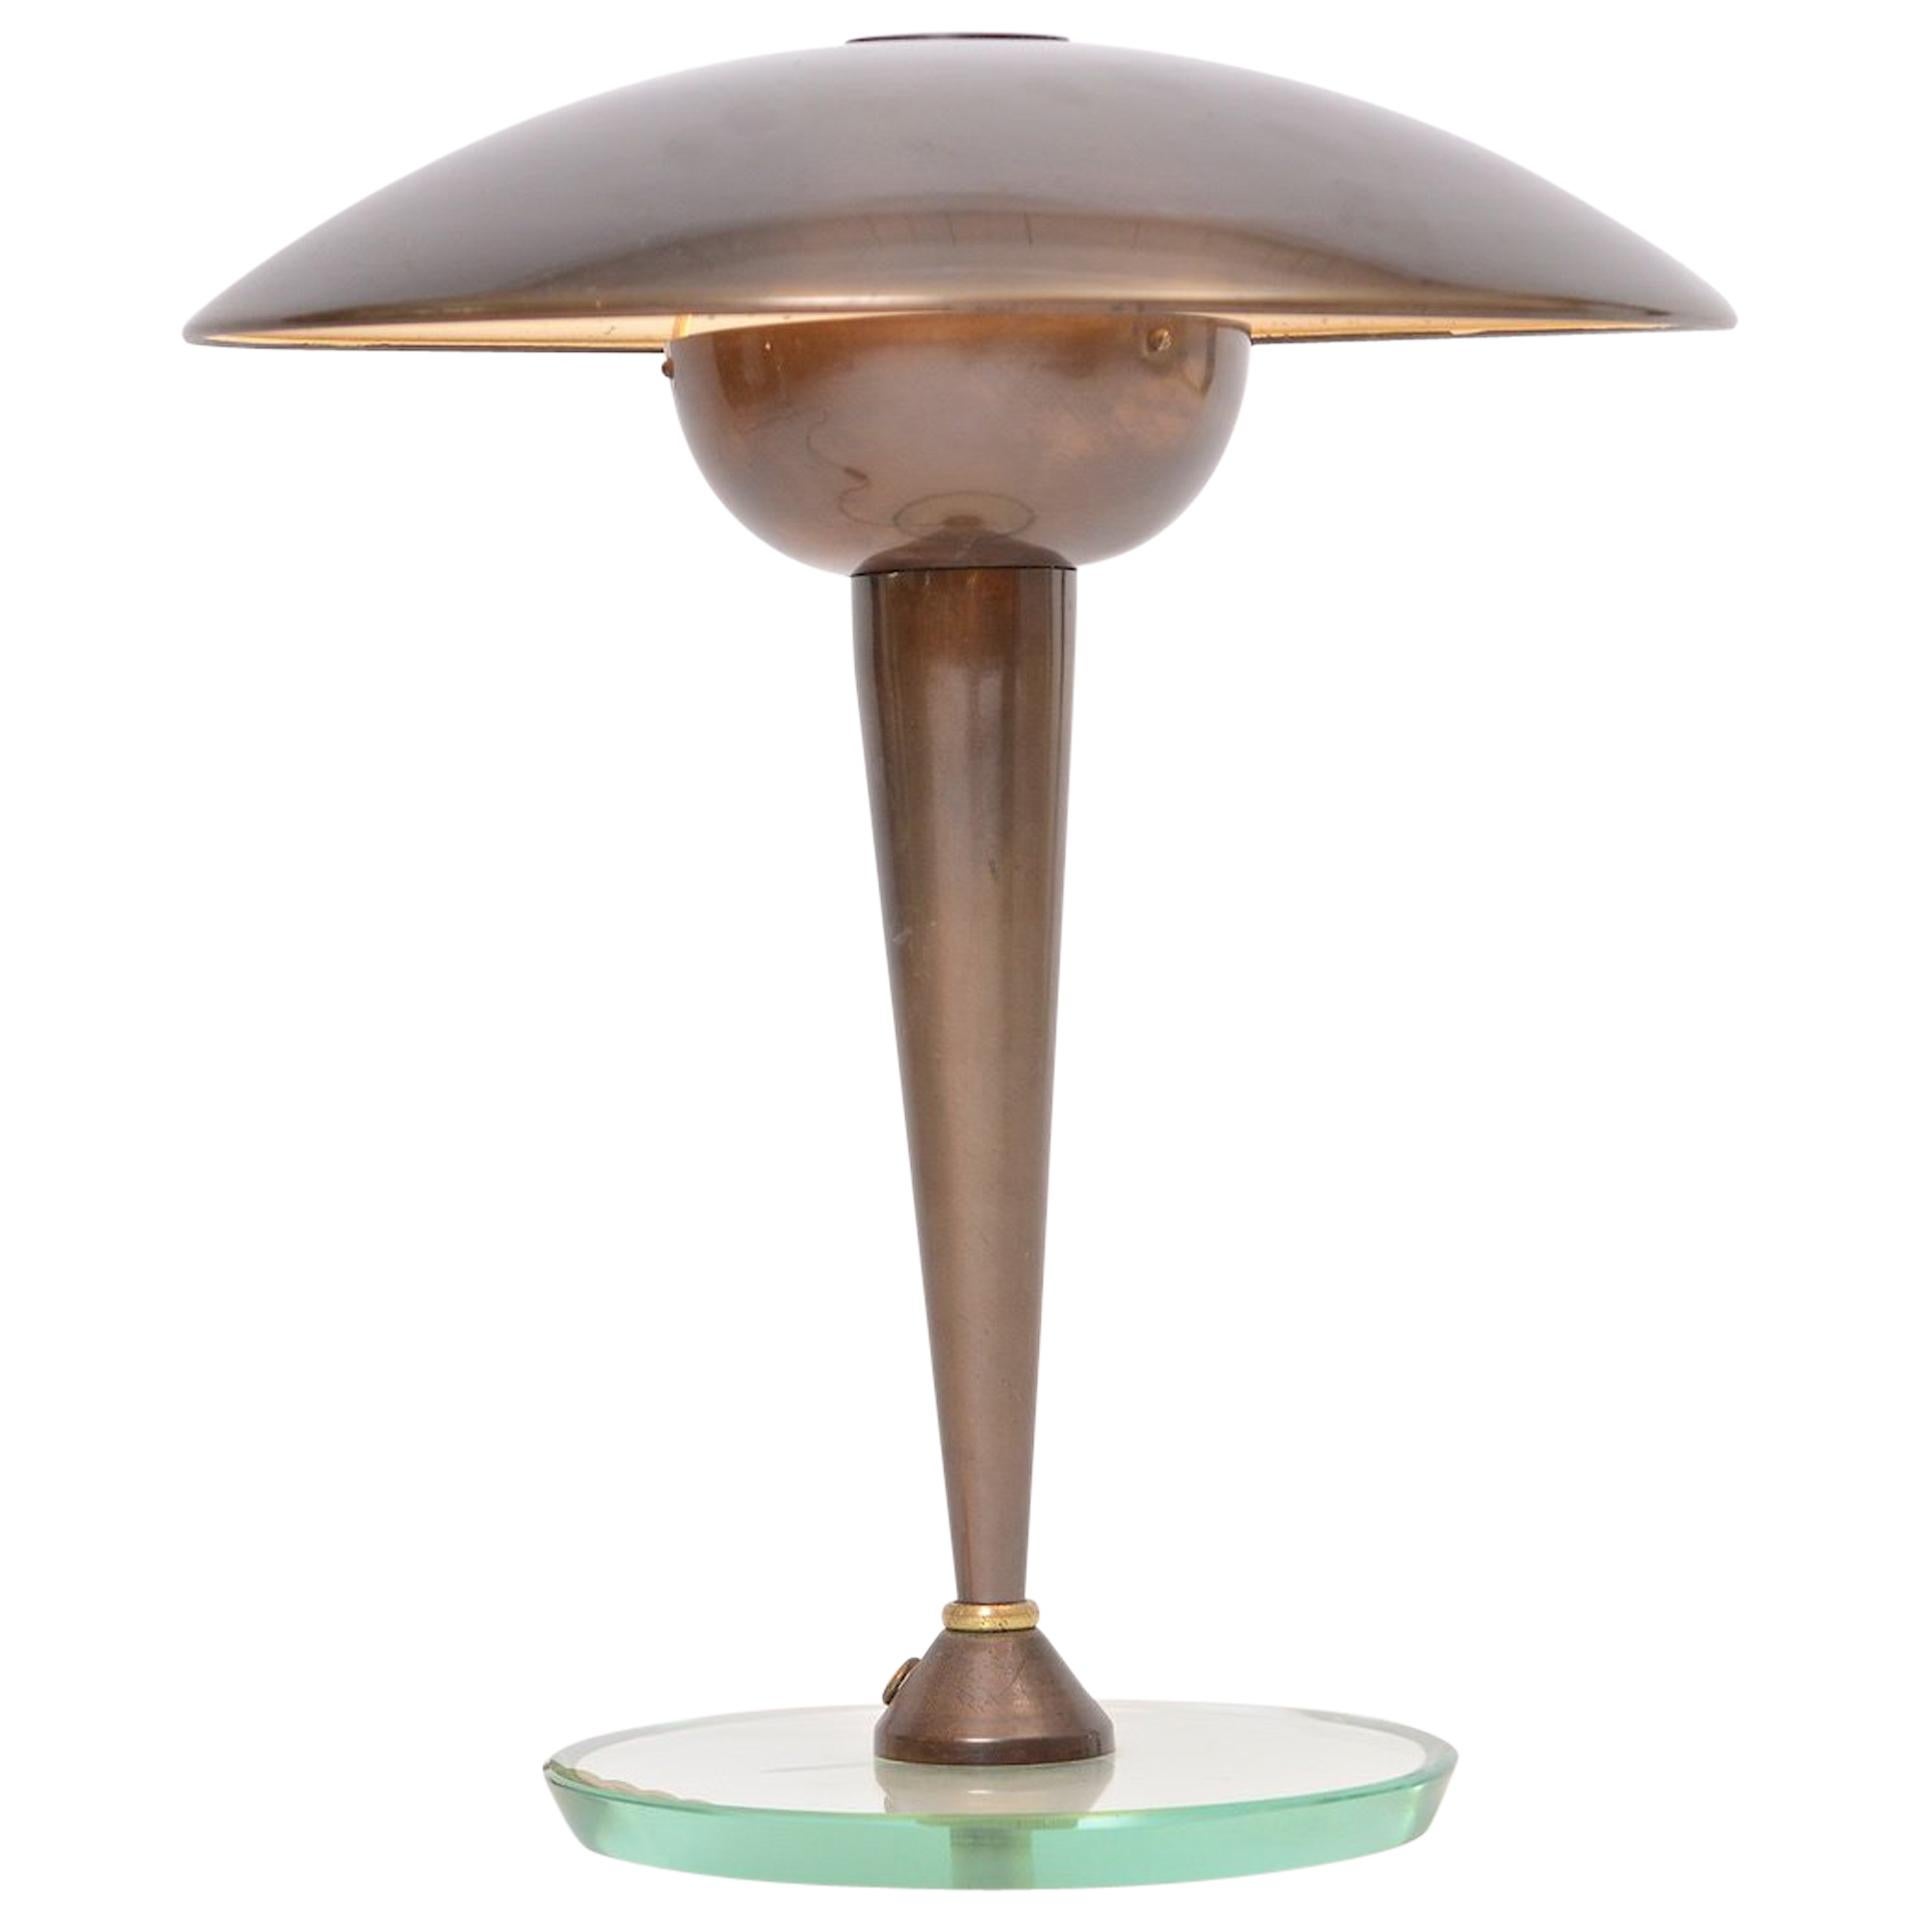 Torlasco Style Table Light with Articulated Shade